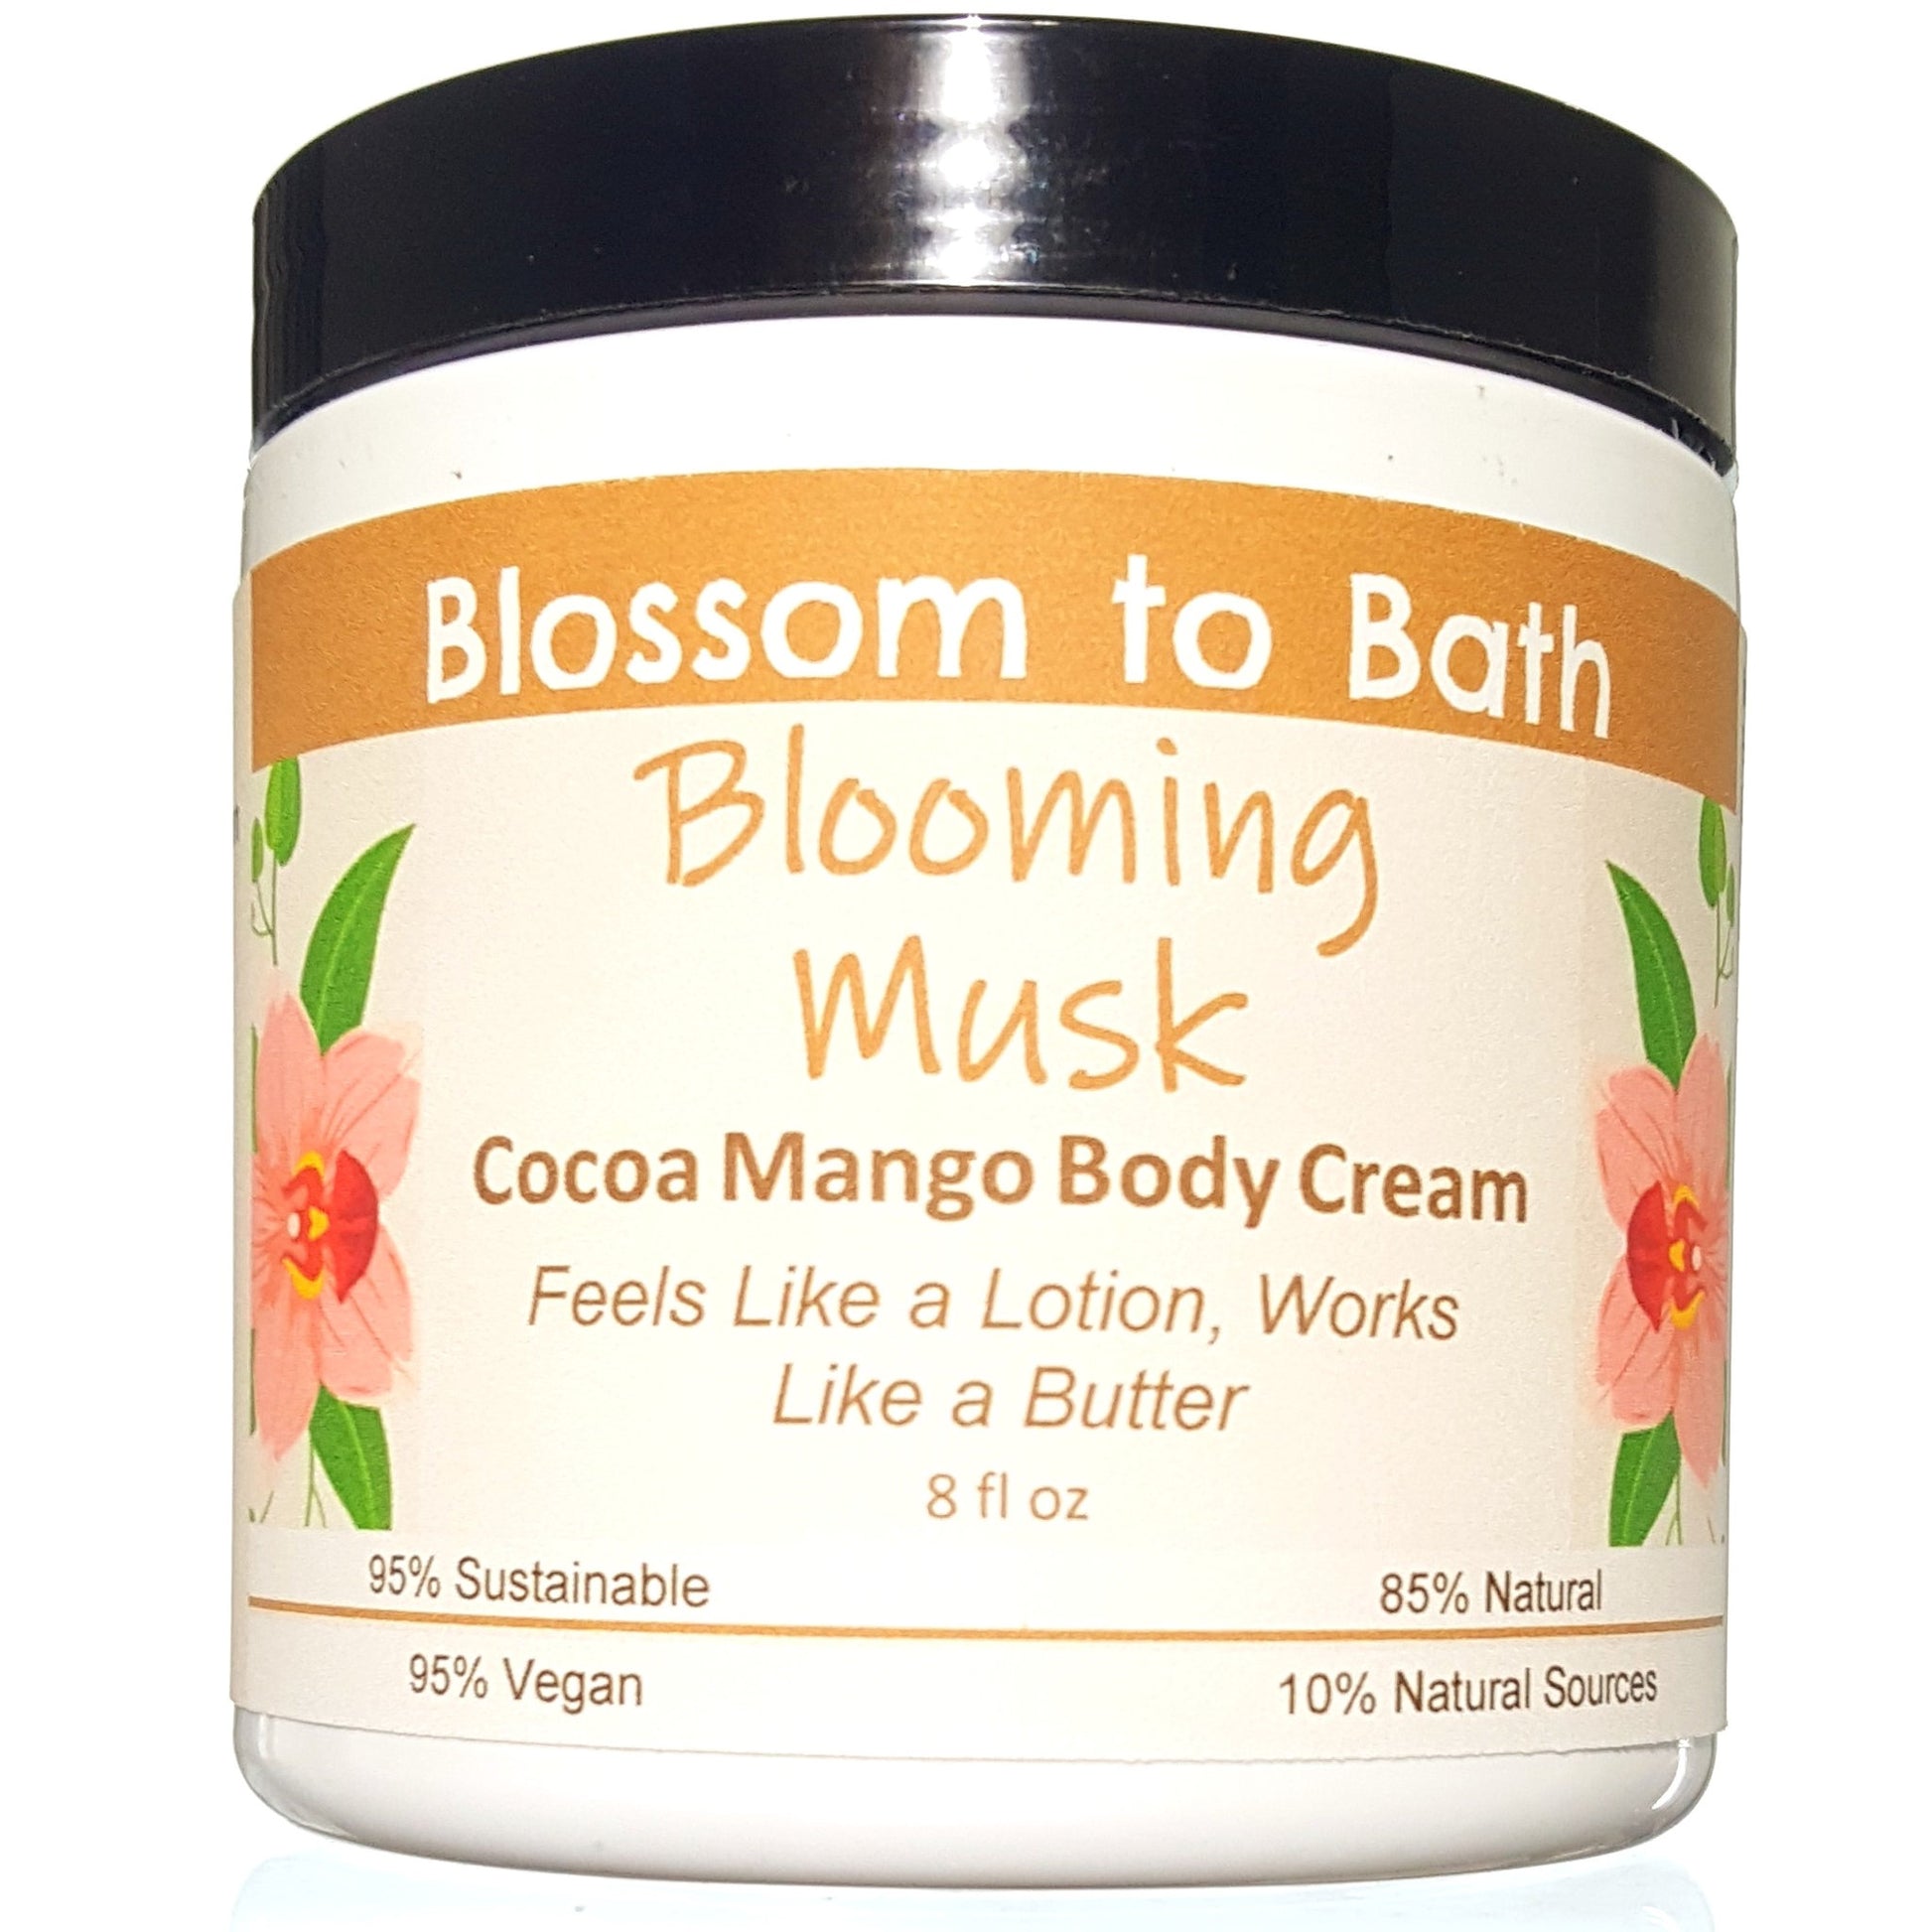 Buy Blossom to Bath Blooming Musk Cocoa Mango Body Cream from Flowersong Soap Studio.  Rich organic butters  soften and moisturize even the roughest skin all day  A sensual floral and musk scent that is subtle and feminine.